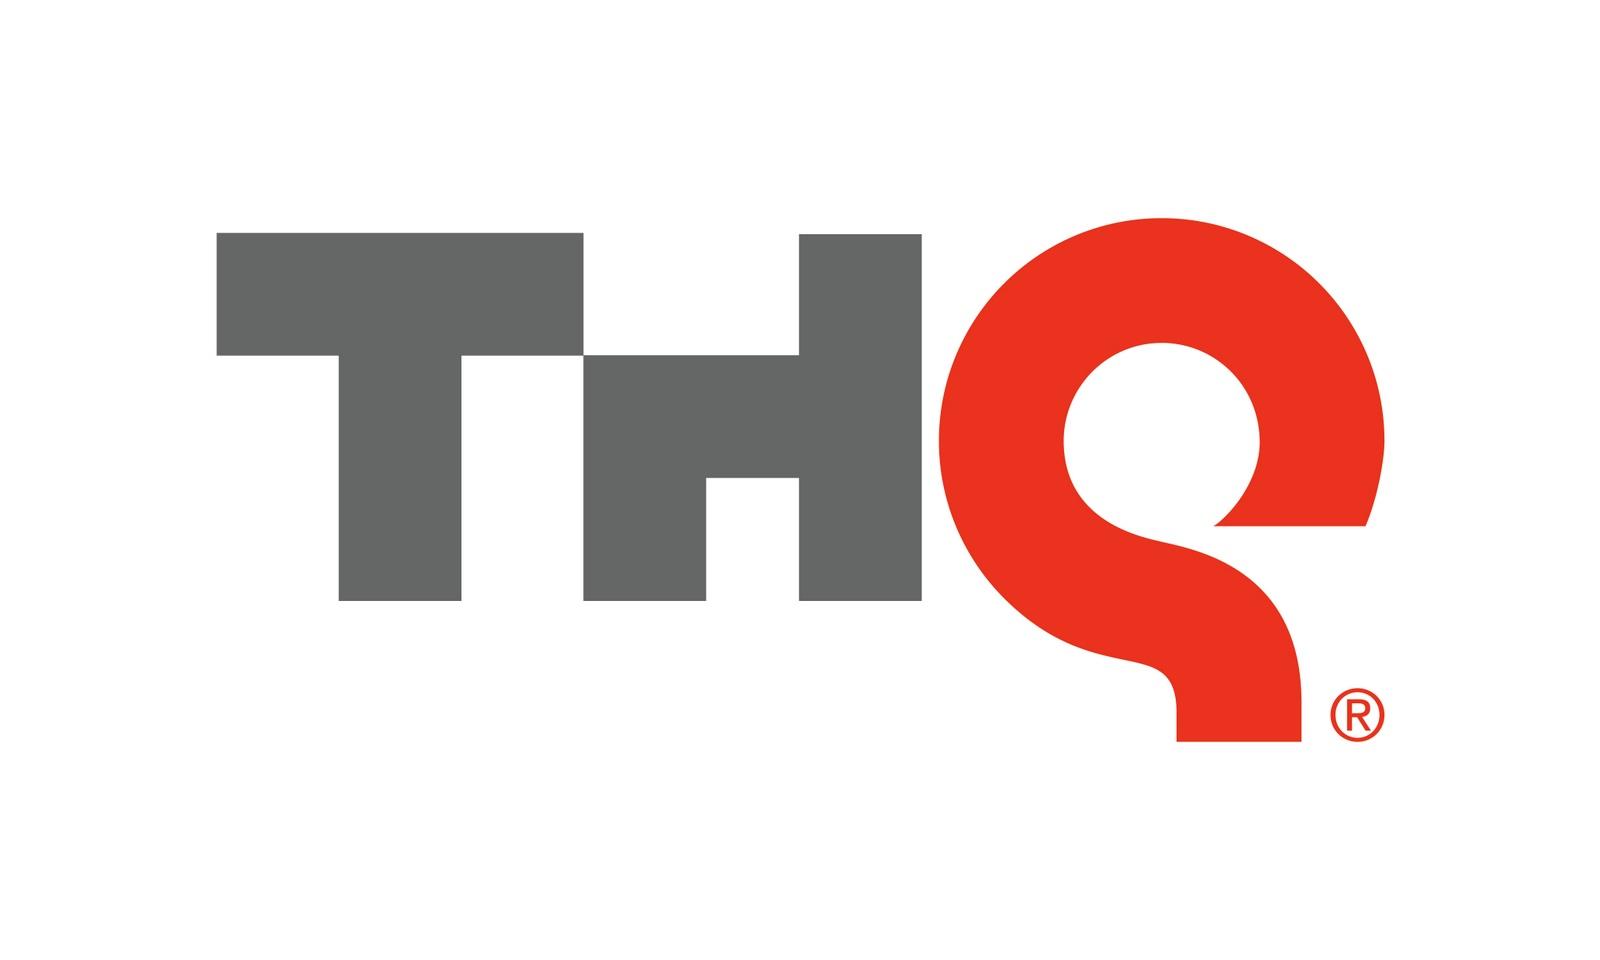 http://www.gamer.ru/system/attached_images/images/000/673/854/original/thq-logo.jpg